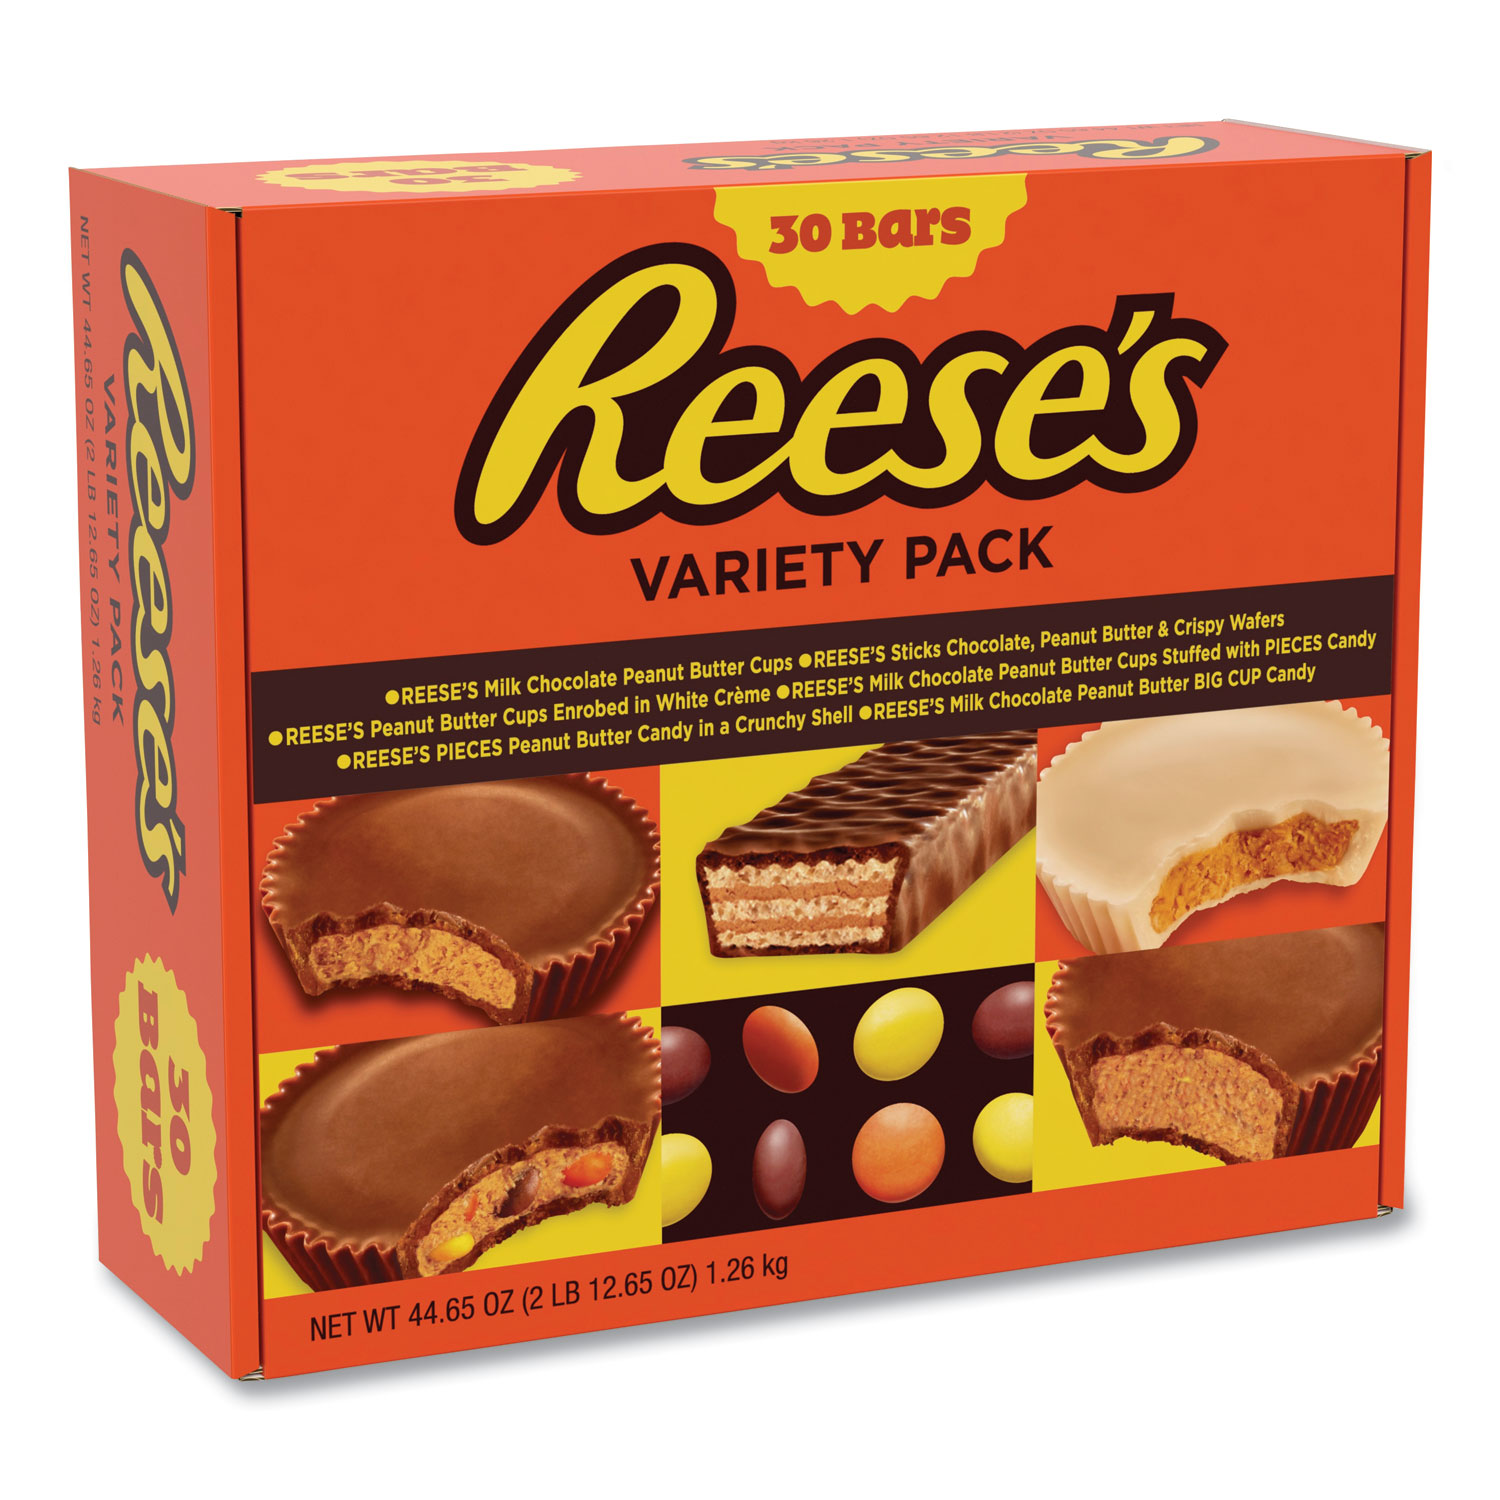  Reese's 43372 Variety Pack Assortment, 44.65 oz Box, 30 Bars/Box, Free Delivery in 1-4 Business Days (GRR24600286) 